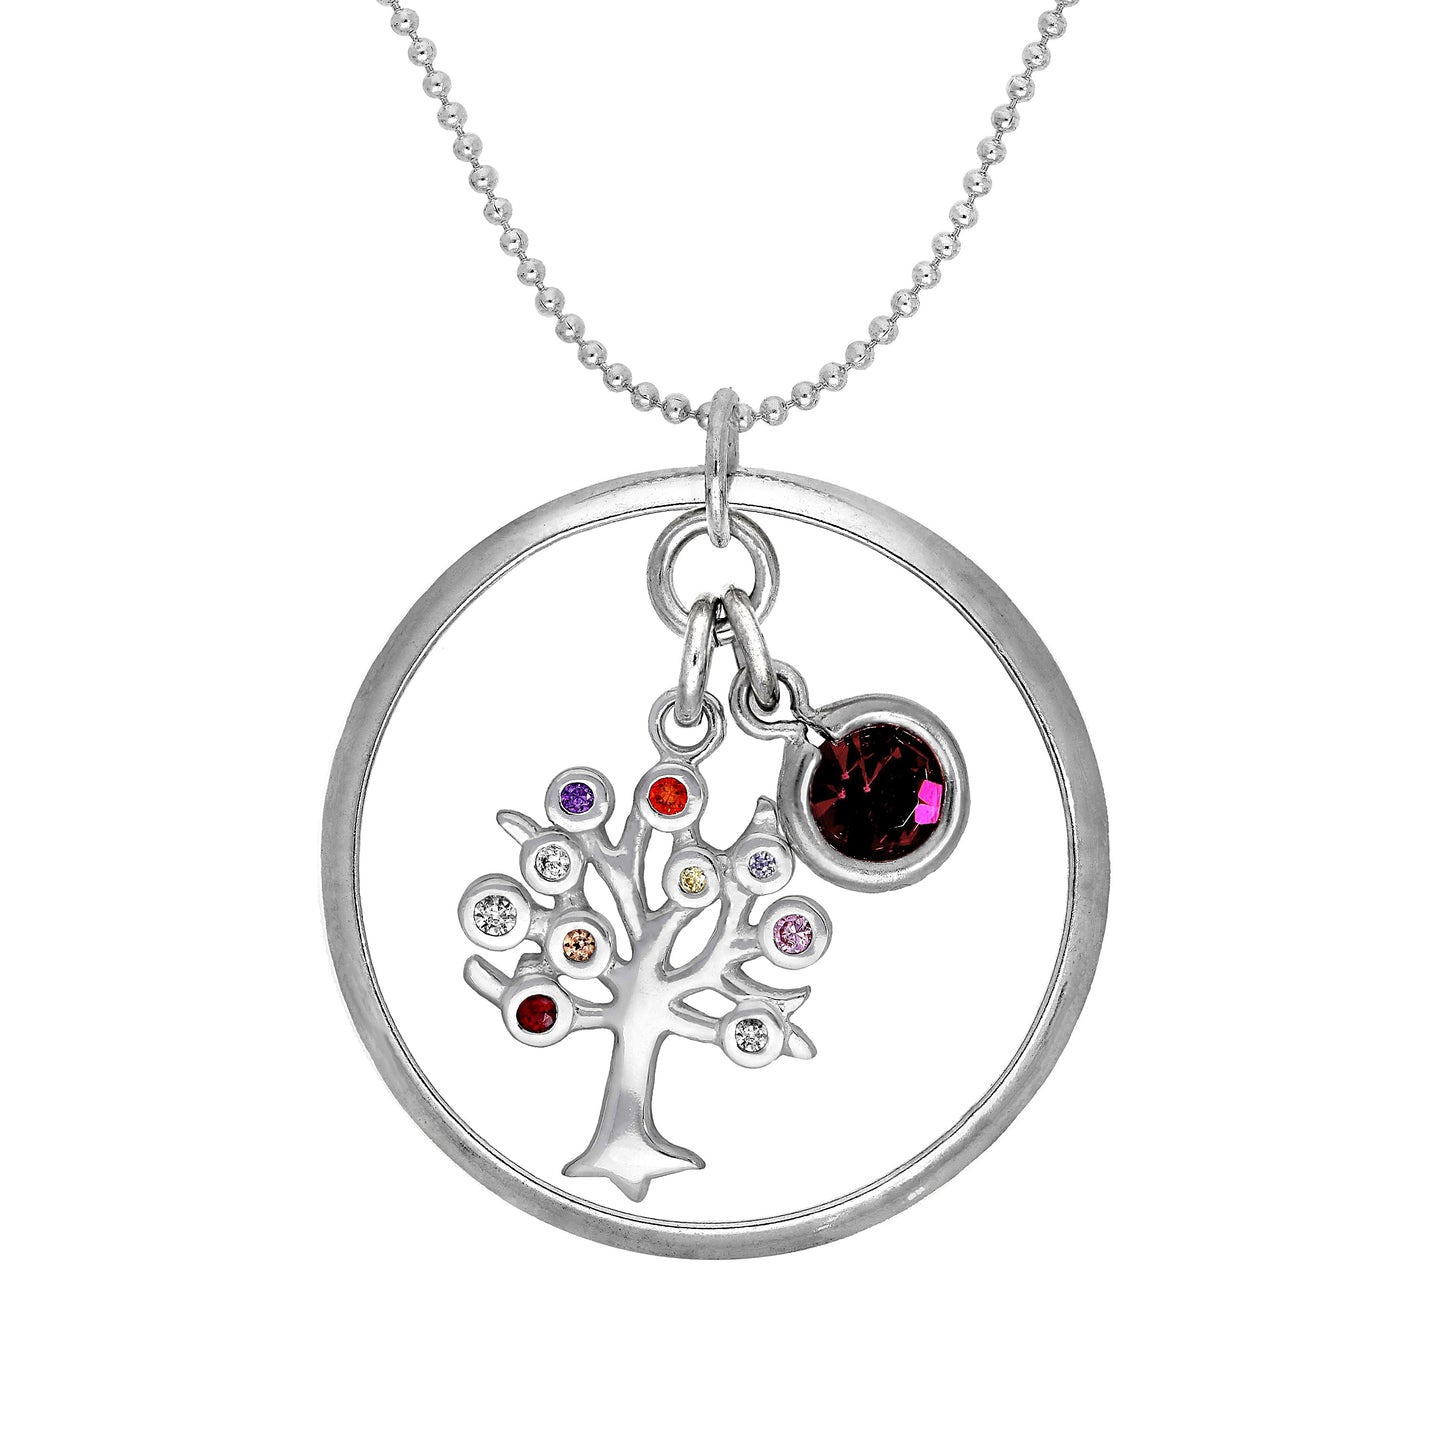 Sterling Silver Karma Moments Pendant with Birthstone CZ Charm on Bead Chain Necklace